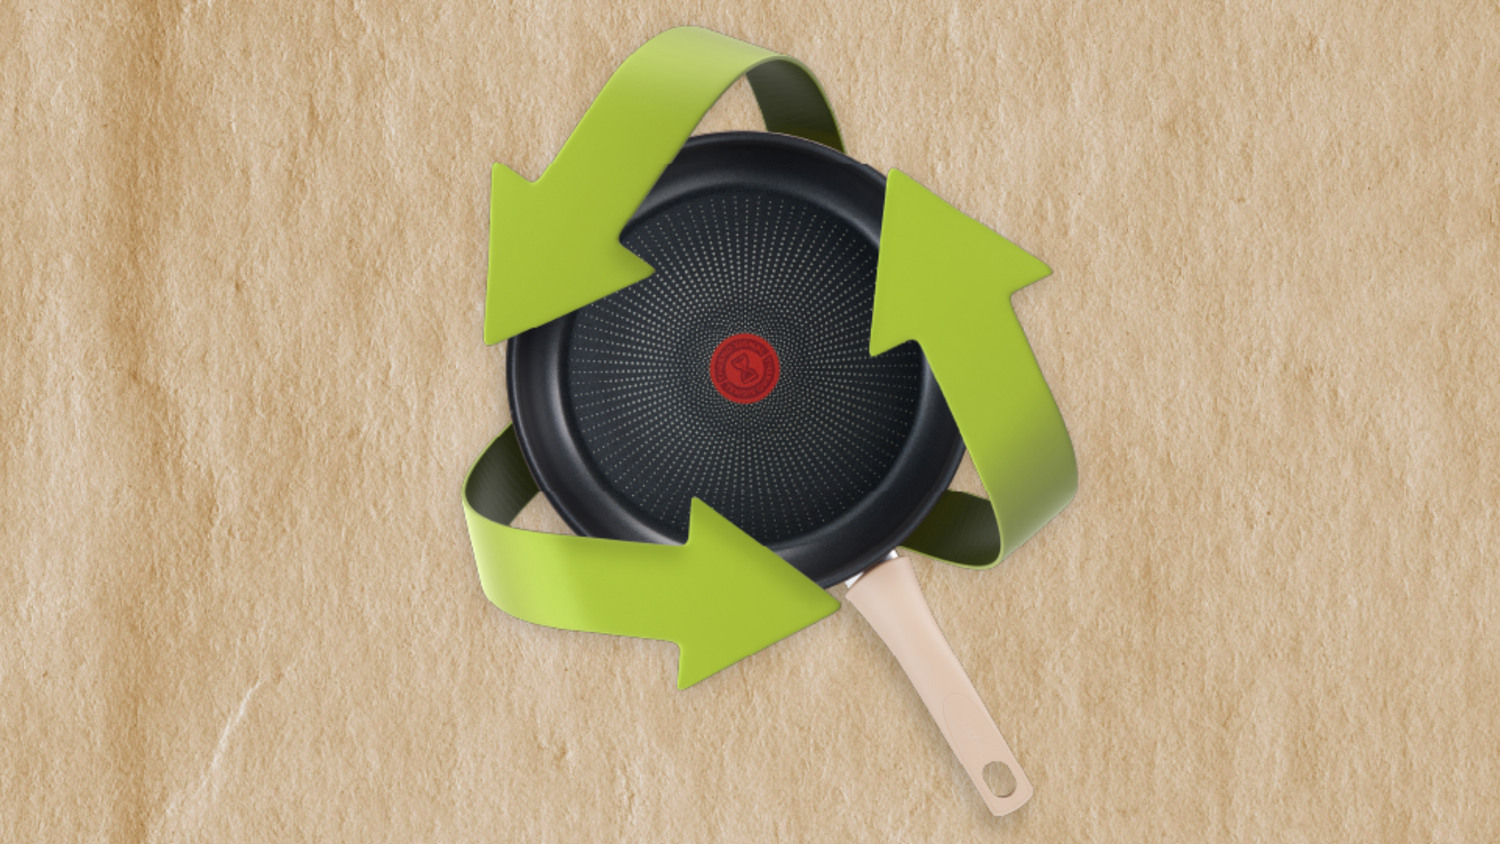 Recycling cookware: How to responsibly recycle cookware